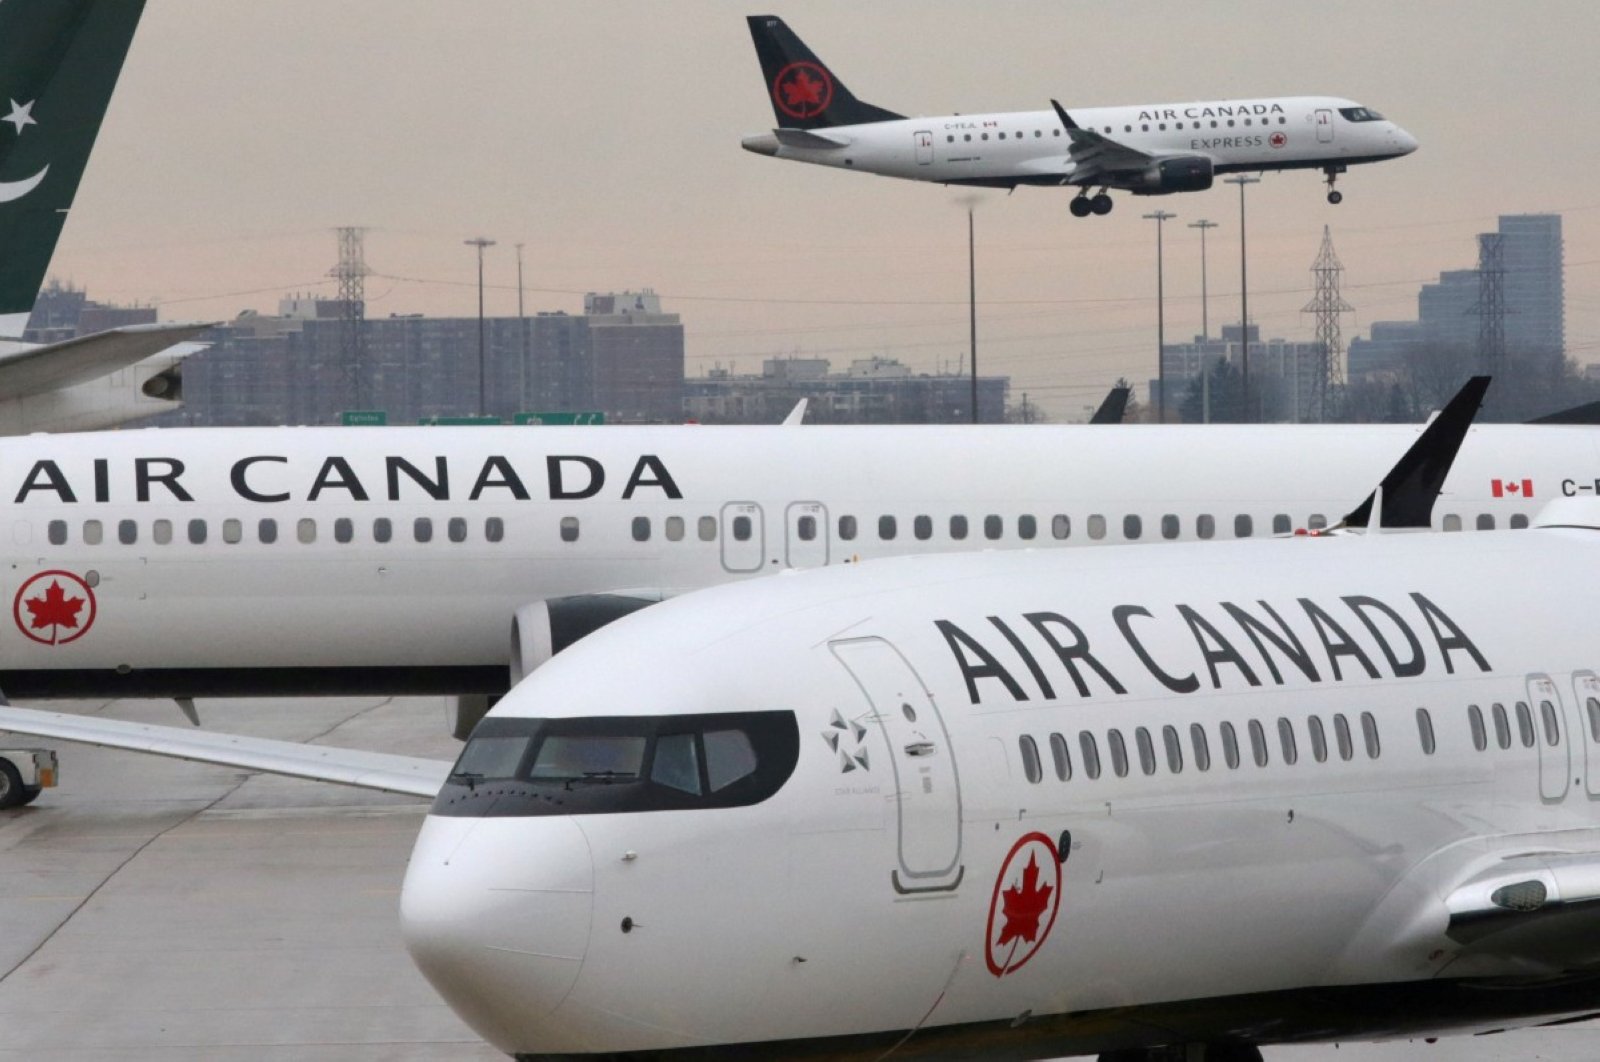 Two Air Canada Boeing 737 MAX 8 aircrafts are seen on the ground as Air Canada Embraer aircraft flies in the background at Toronto Pearson International Airport in Toronto, Ontario, Canada, March 13, 2019. (REUTERS Photo)